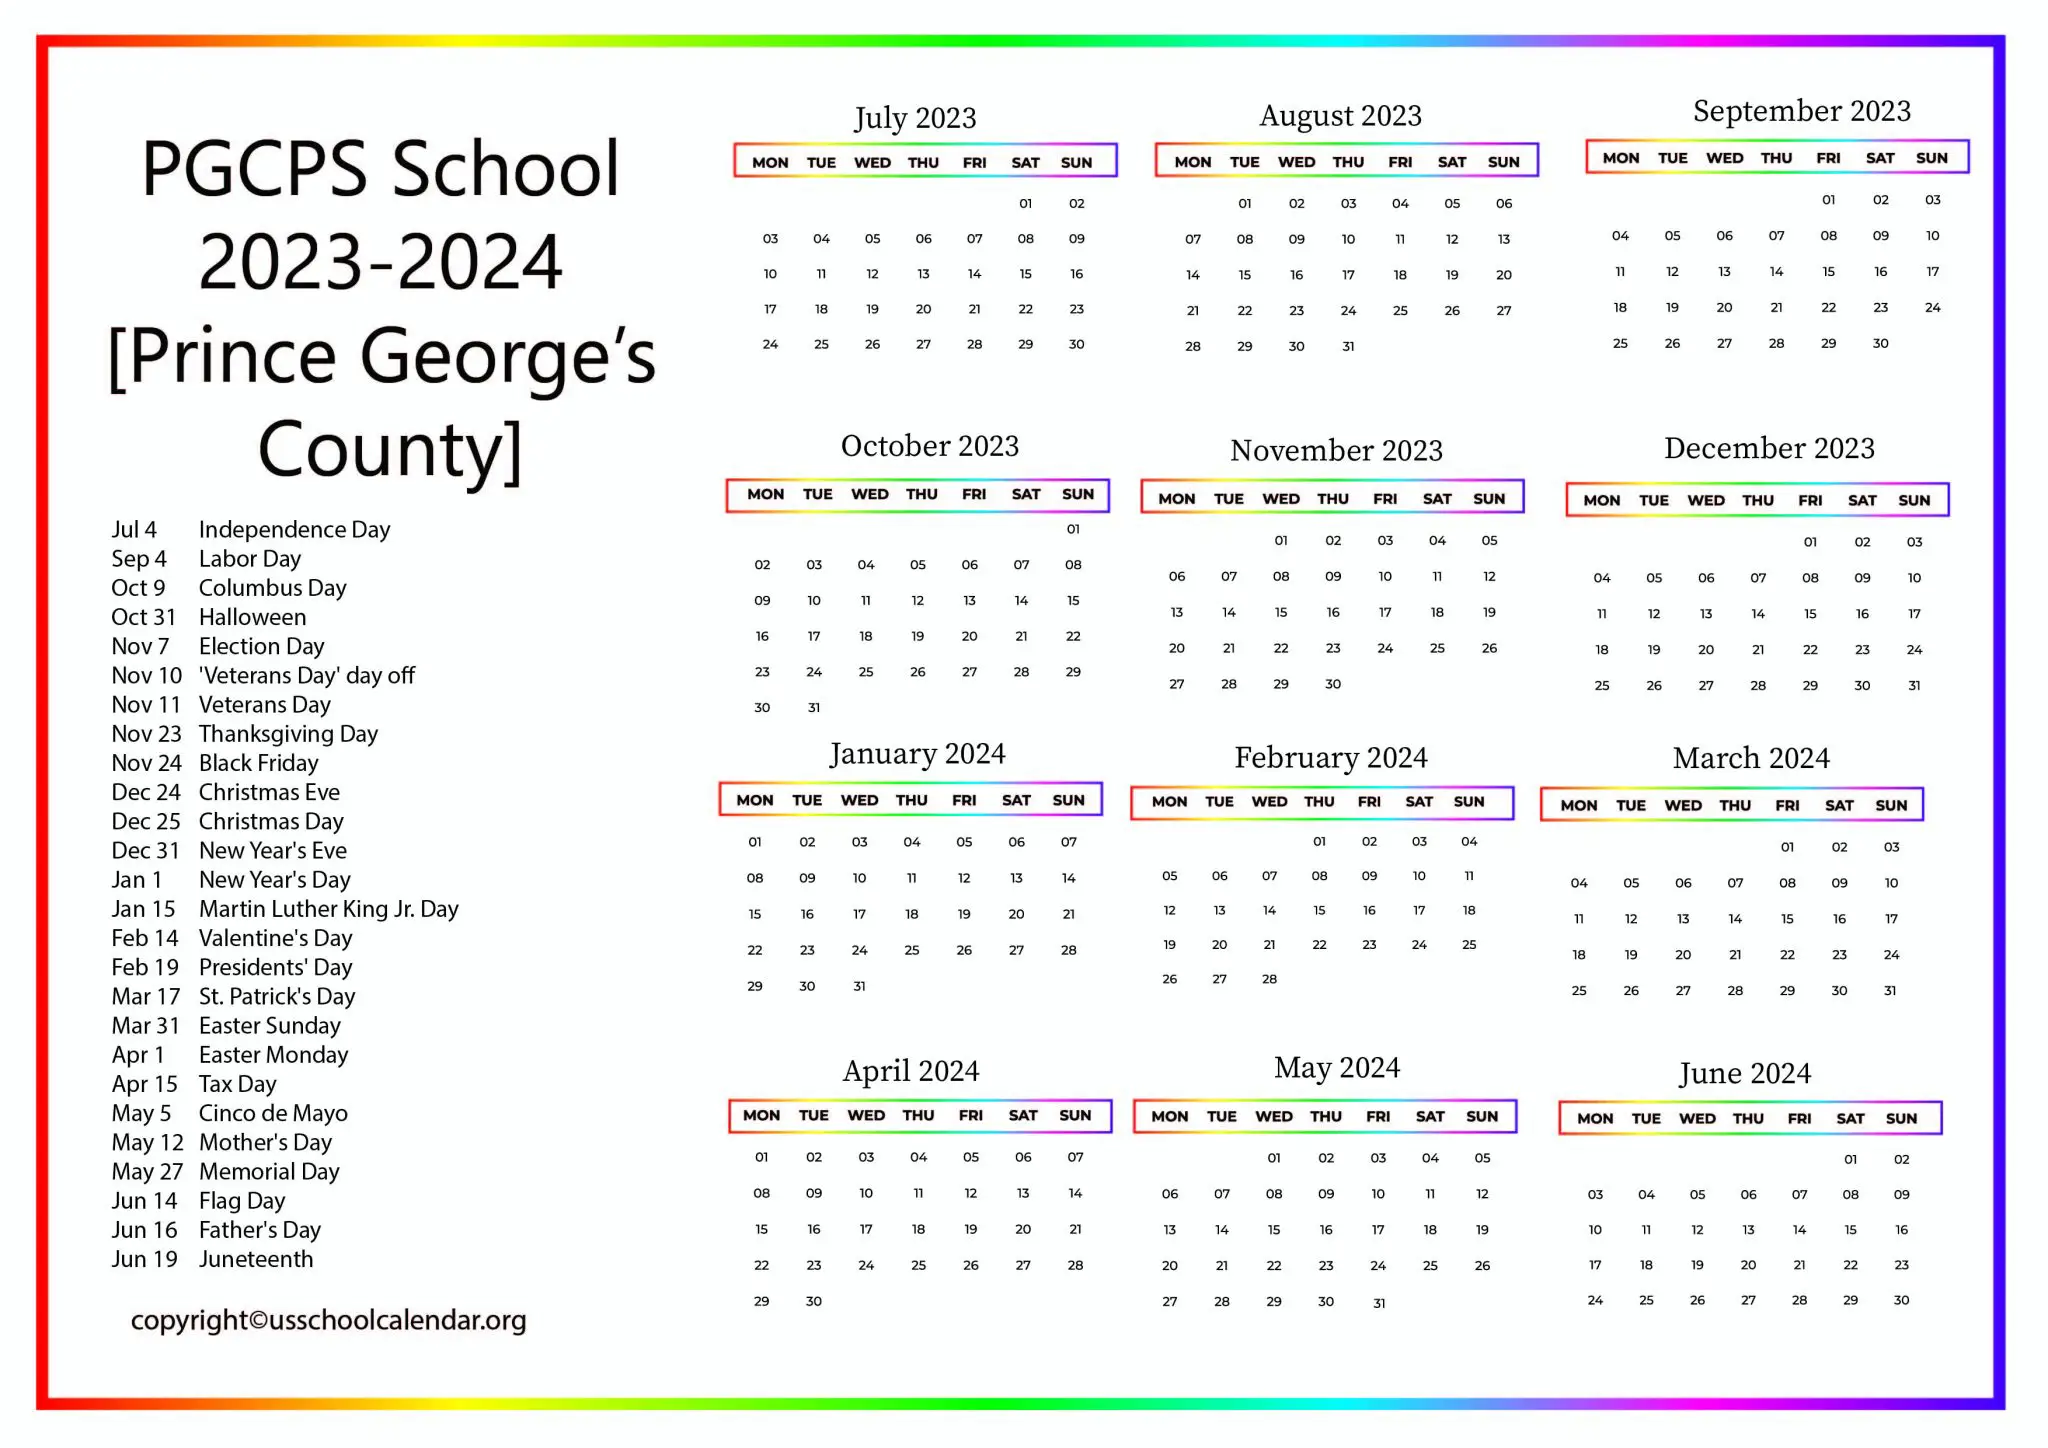 pgcps-school-calendar-for-2023-2024-prince-george-s-county